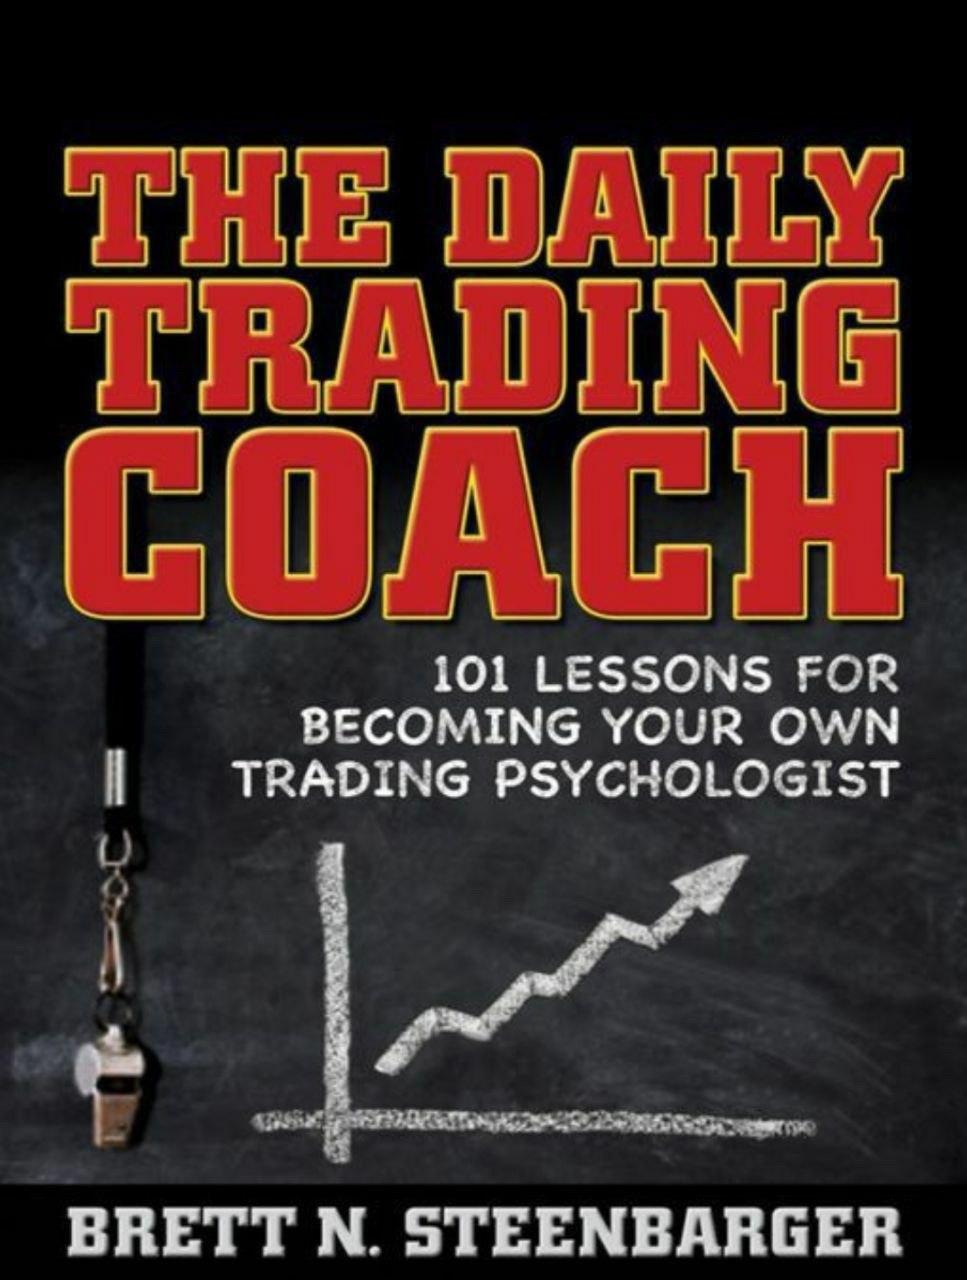 THE DAILY TRADING COACH